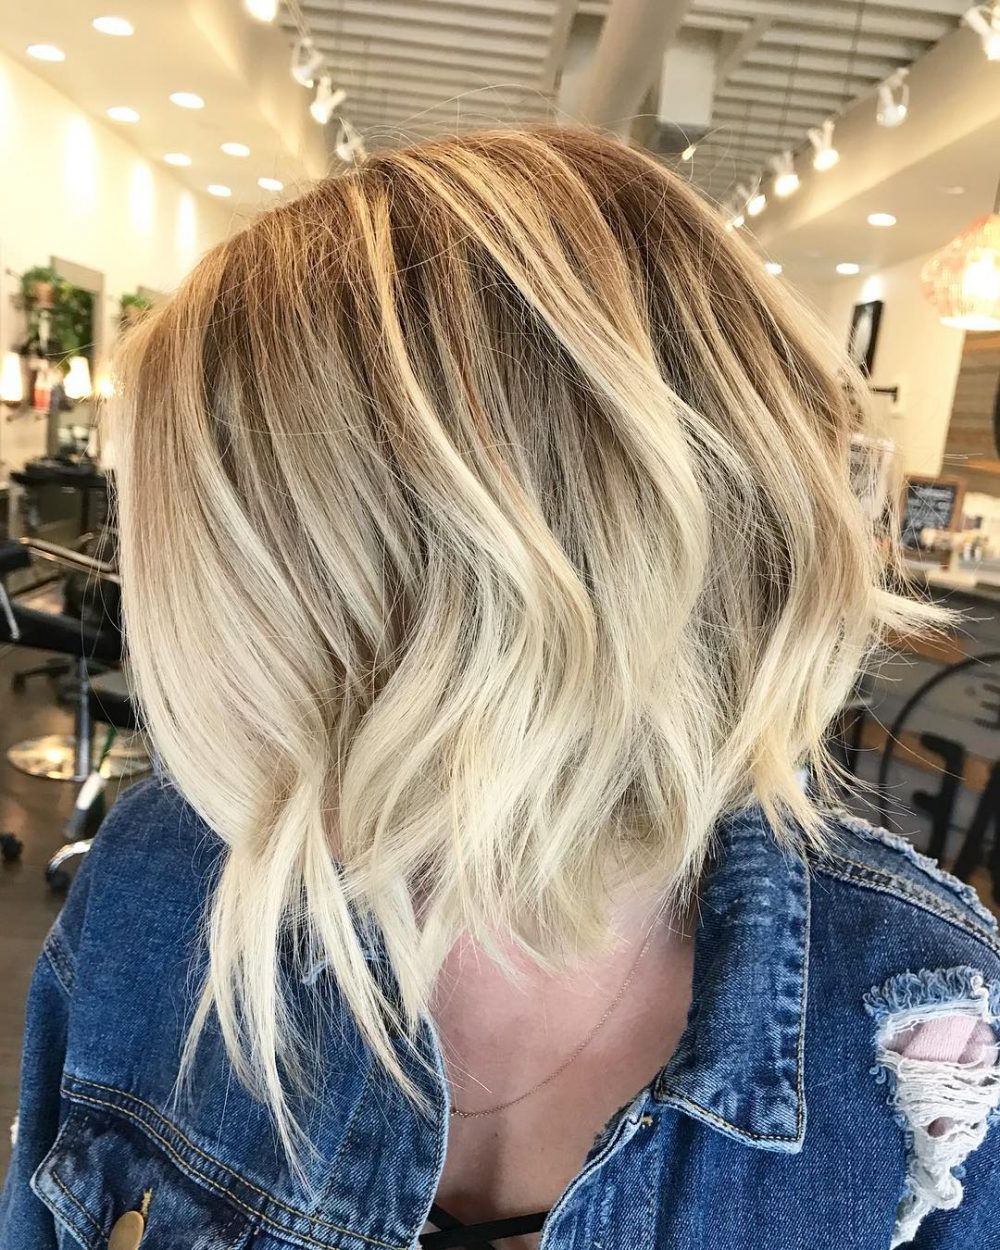 34 Best Choppy Layered Hairstyles (that Will Flatter Anyone) Pertaining To Most Up To Date Choppy Layers Hairstyles (View 3 of 20)